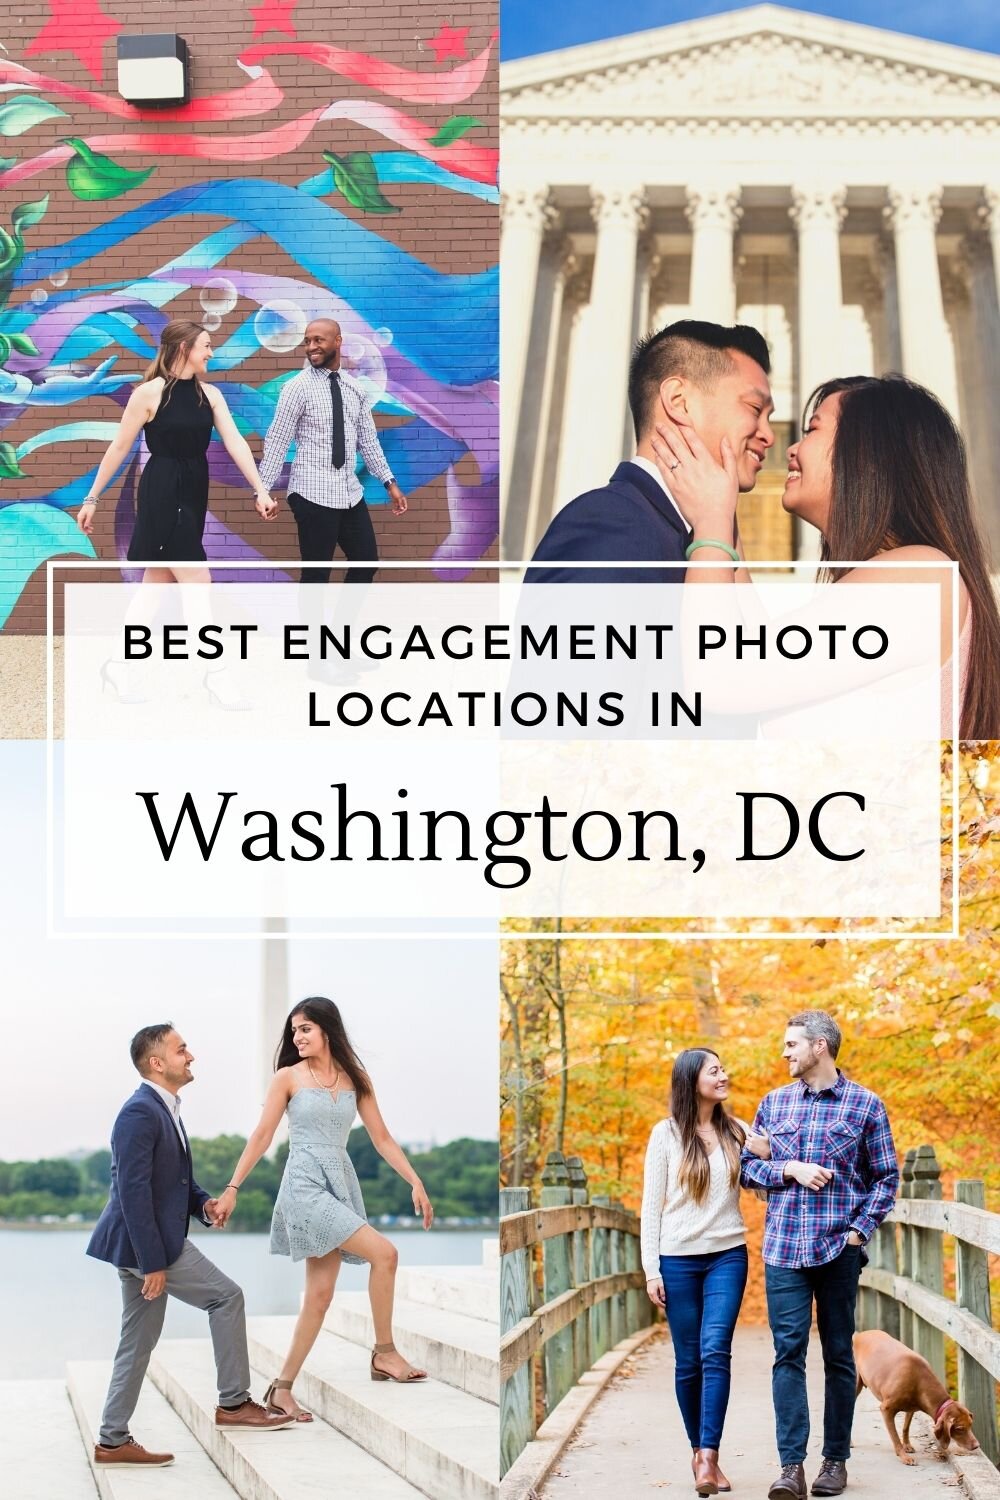 Engagement locations in DC